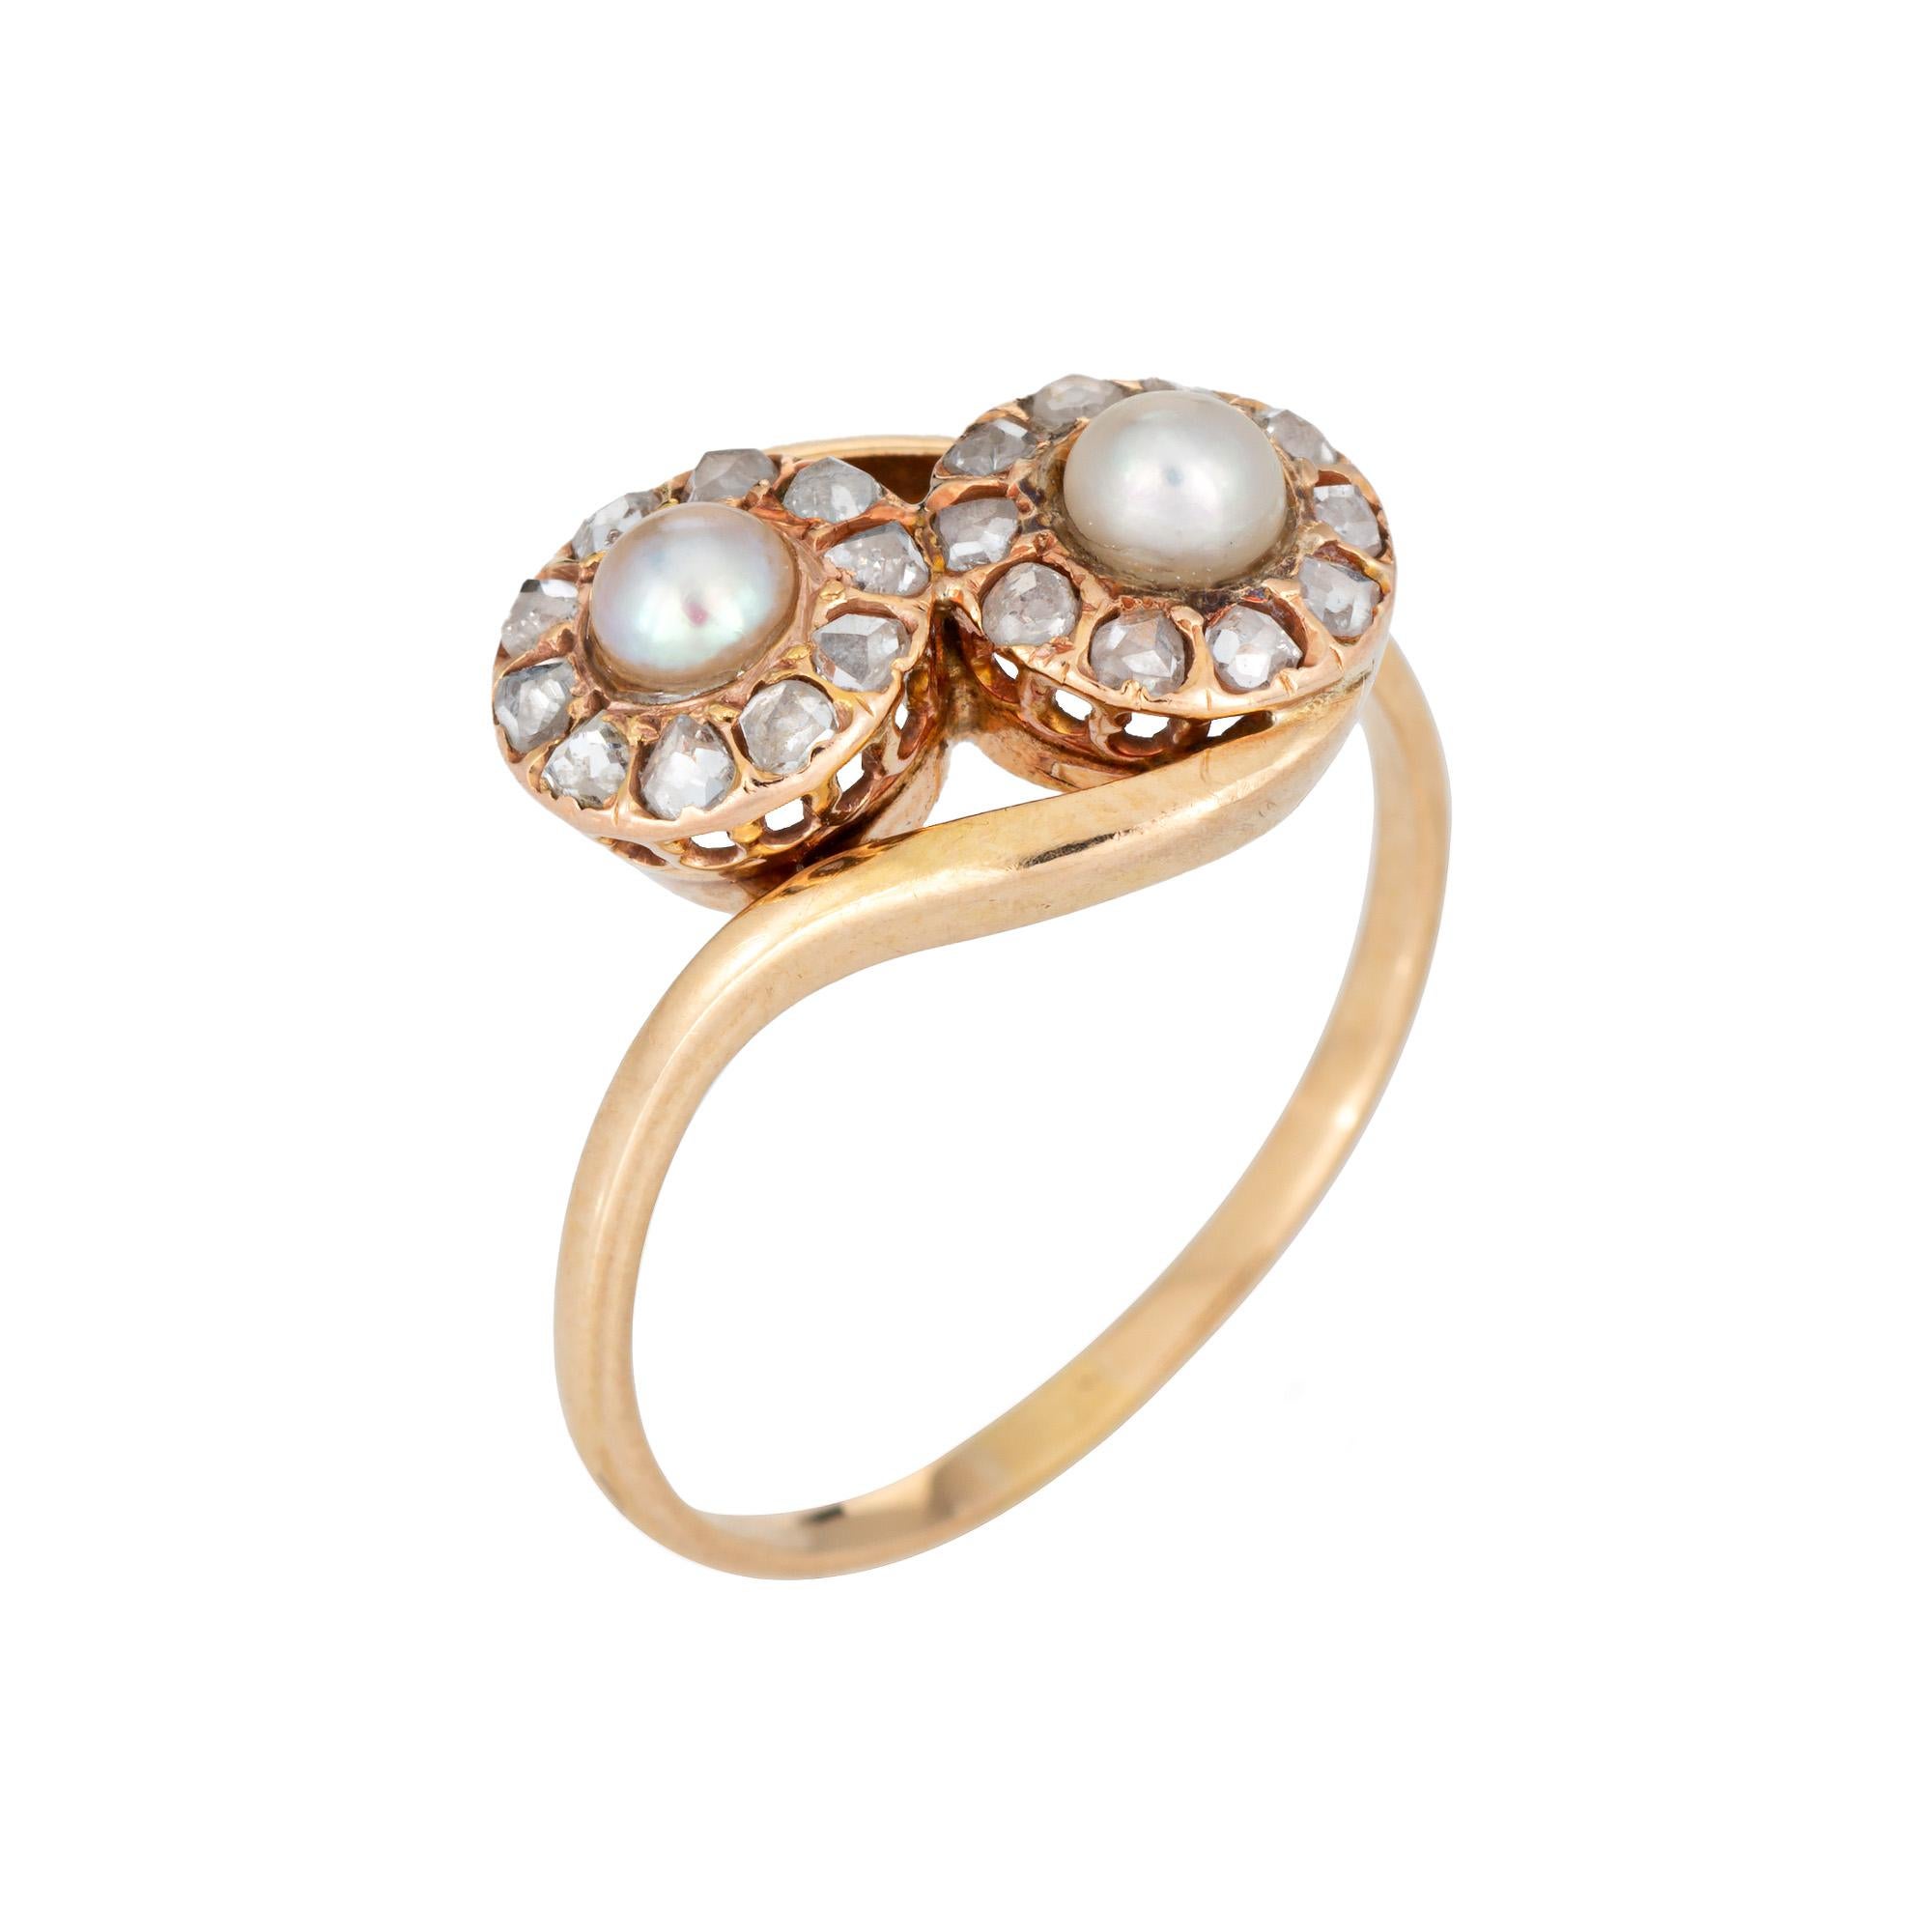 
Finely detailed vintage Art Deco era diamond & cultured pearl 'moi et toi' ring crafted in 14k yellow gold (circa 1920s to 1930s).  

20 old rose cut diamonds are estimated at 0.02 carats each and total an estimated 0.40 carats (estimated at J-K